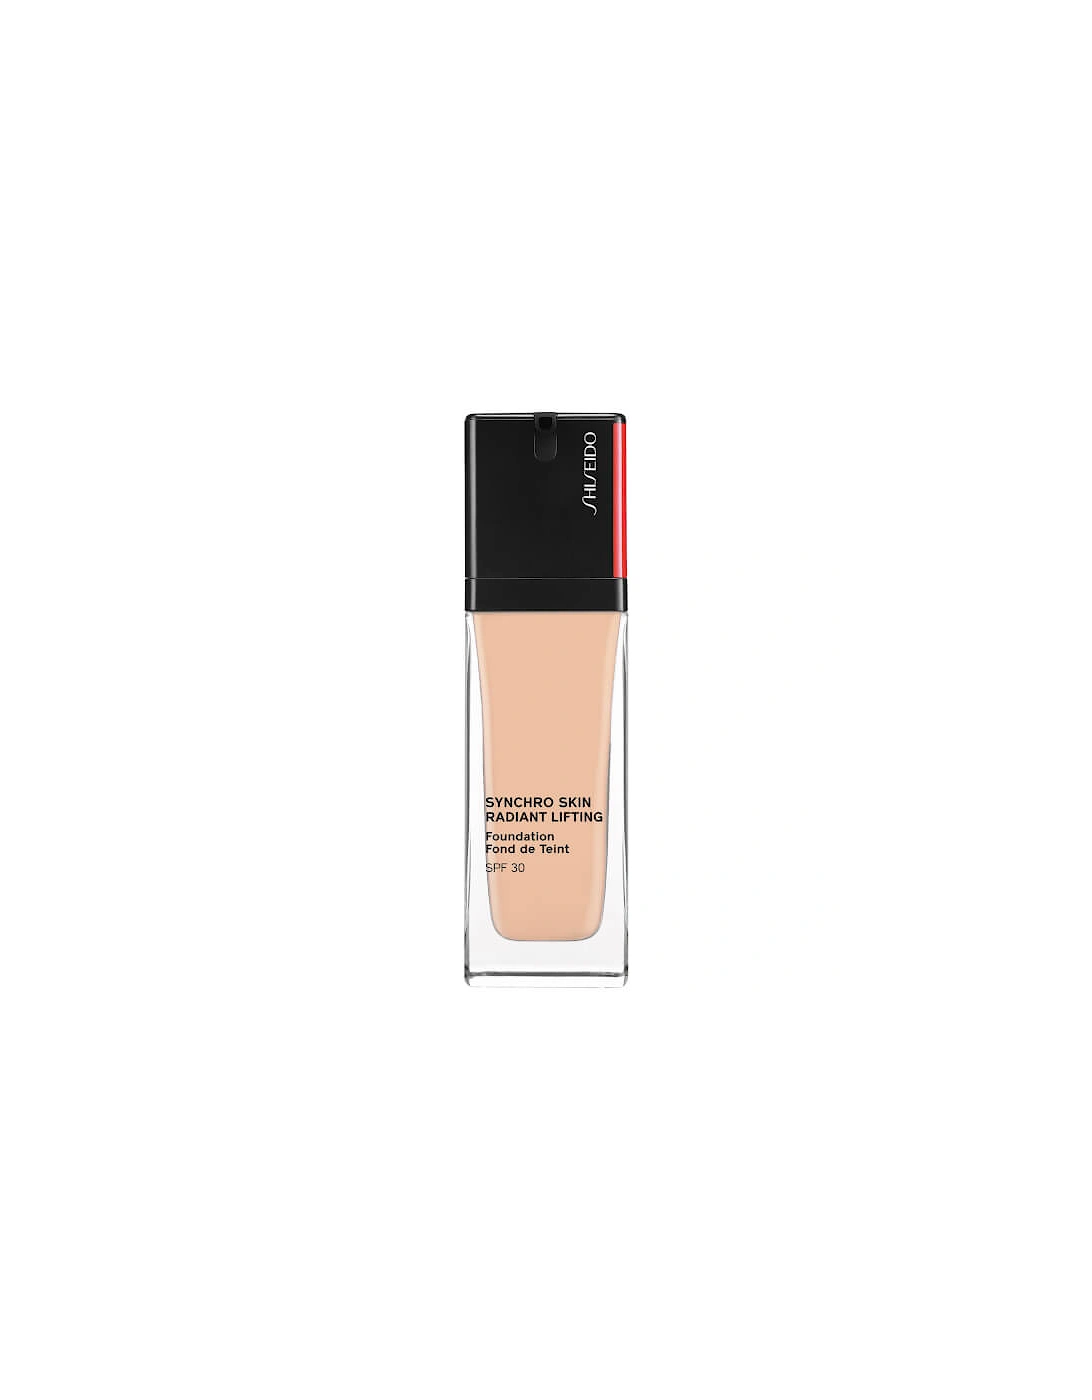 Synchro Skin Radiant Lifting SPF30 Foundation - 150 Lace, 2 of 1